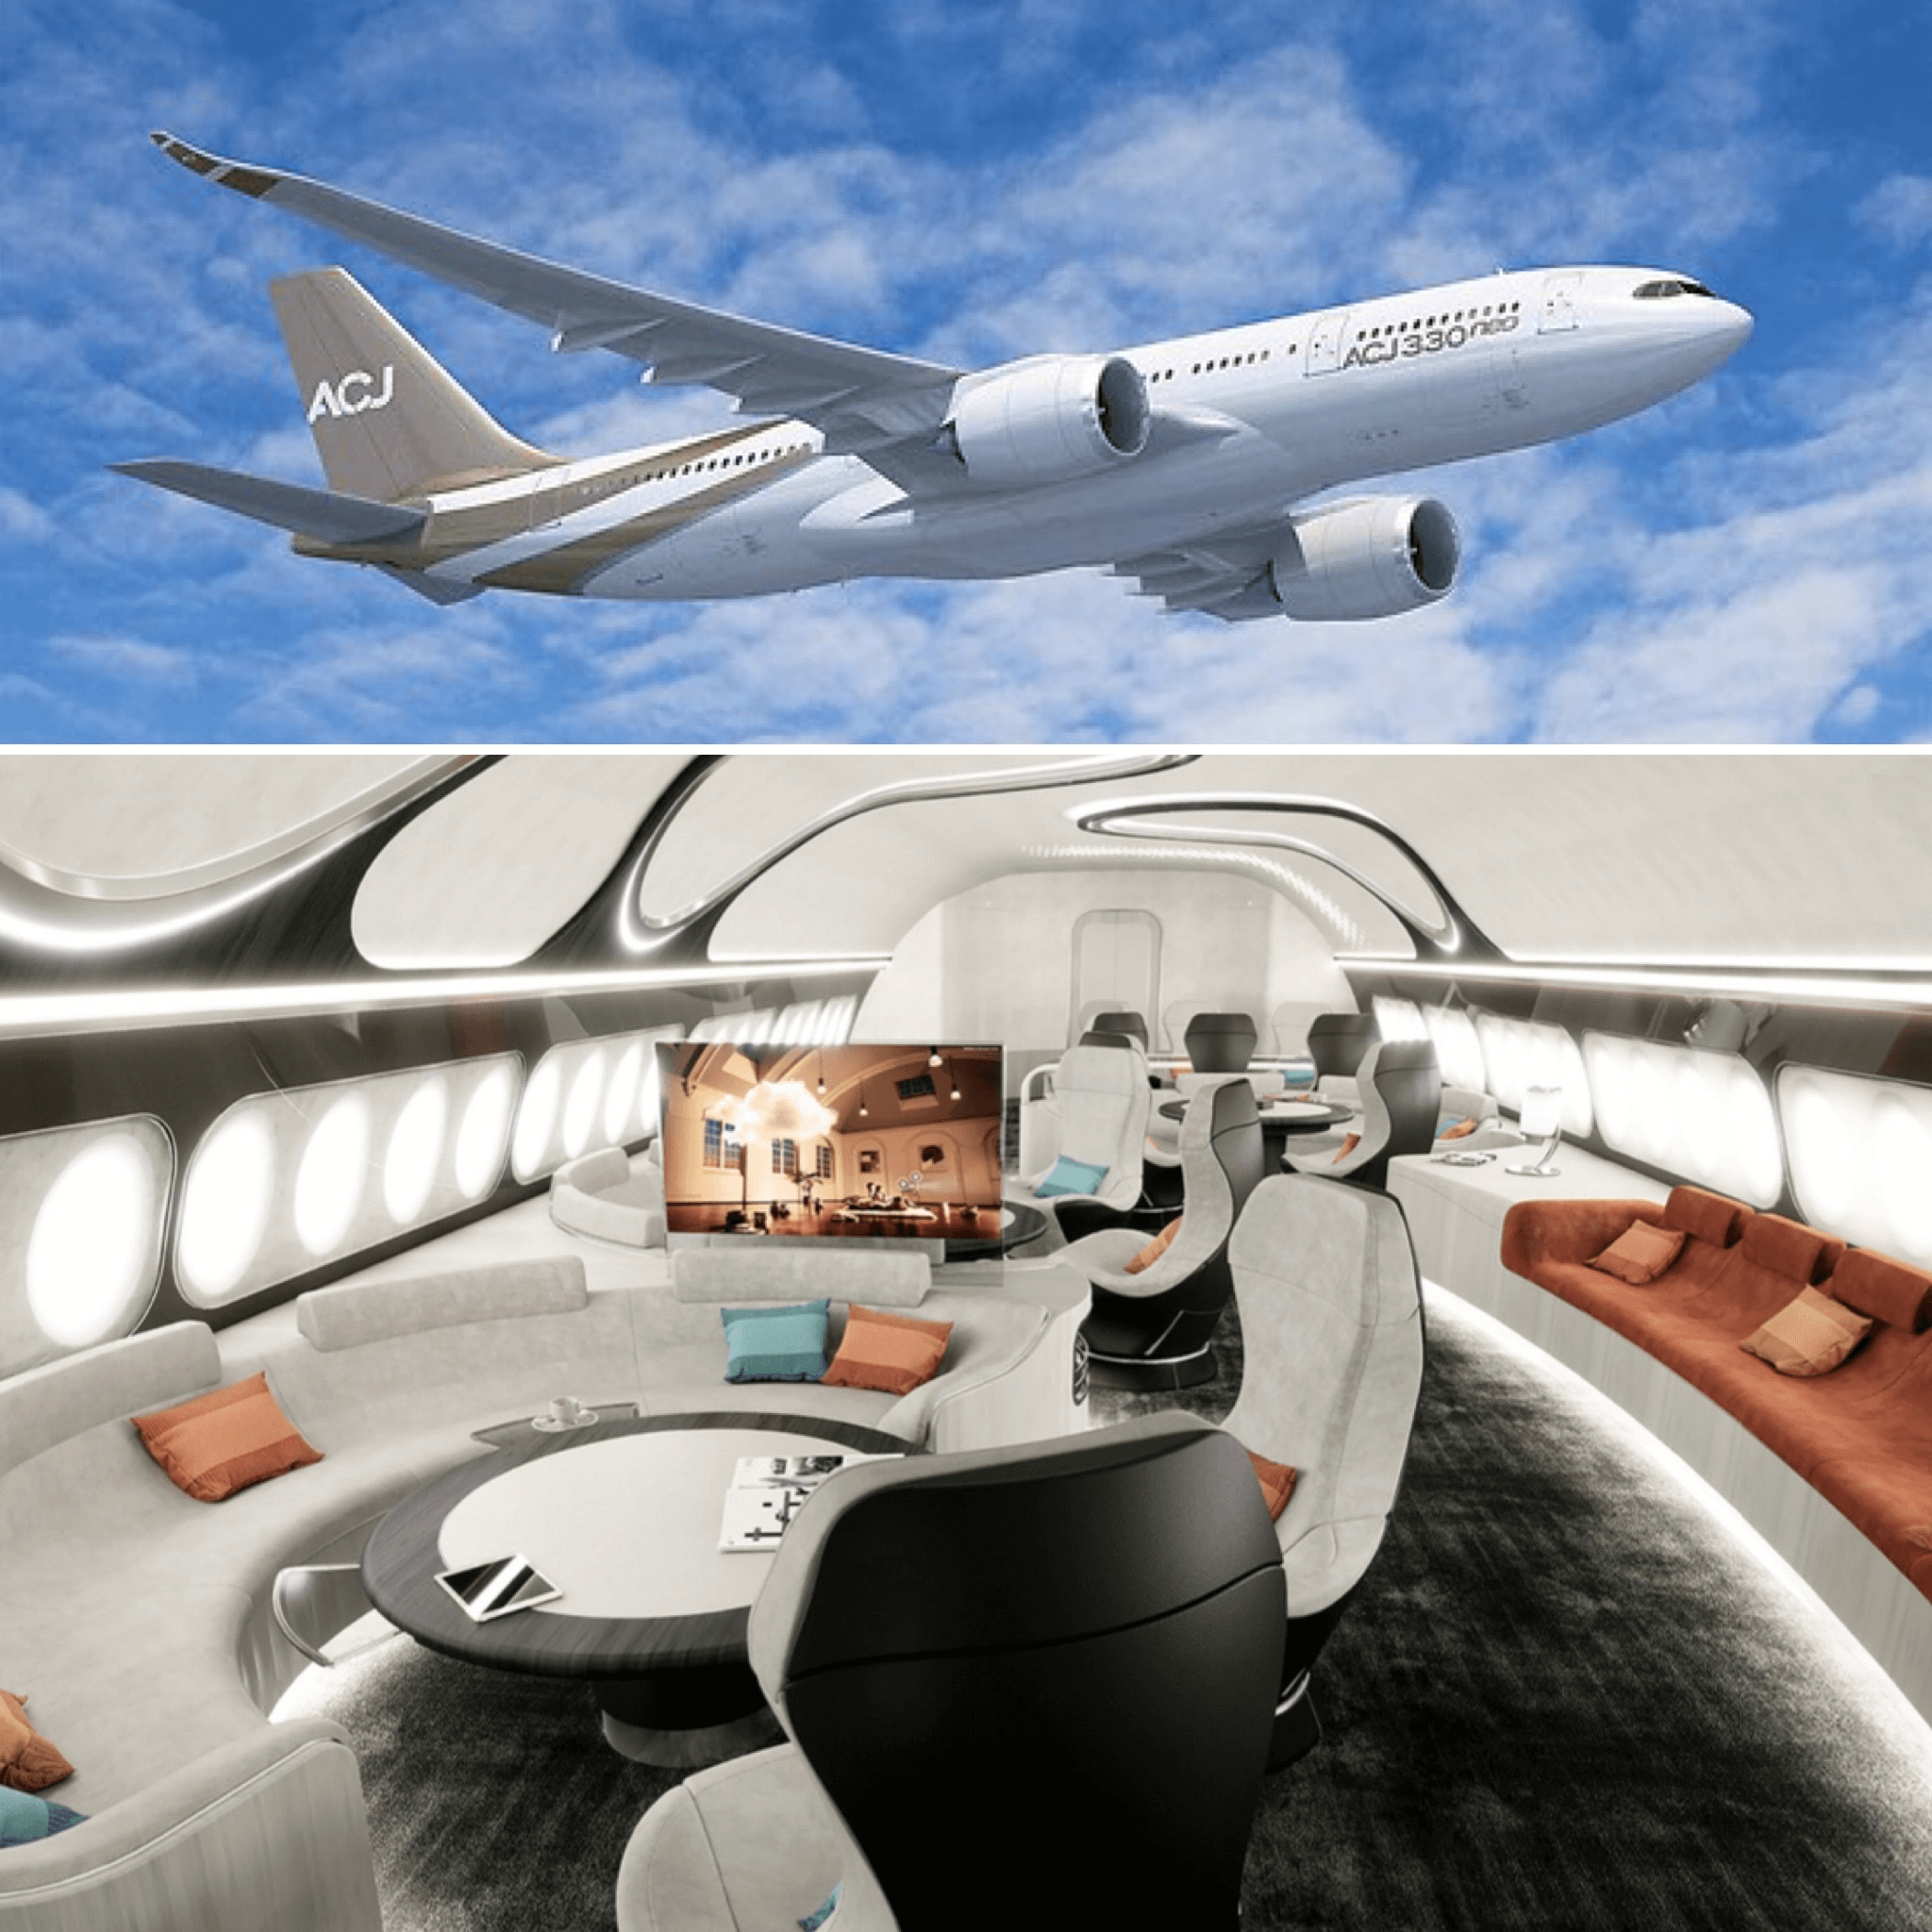 Showcasing one of the world’s most expensive private jets – the Airbus ACJ 330 Neo